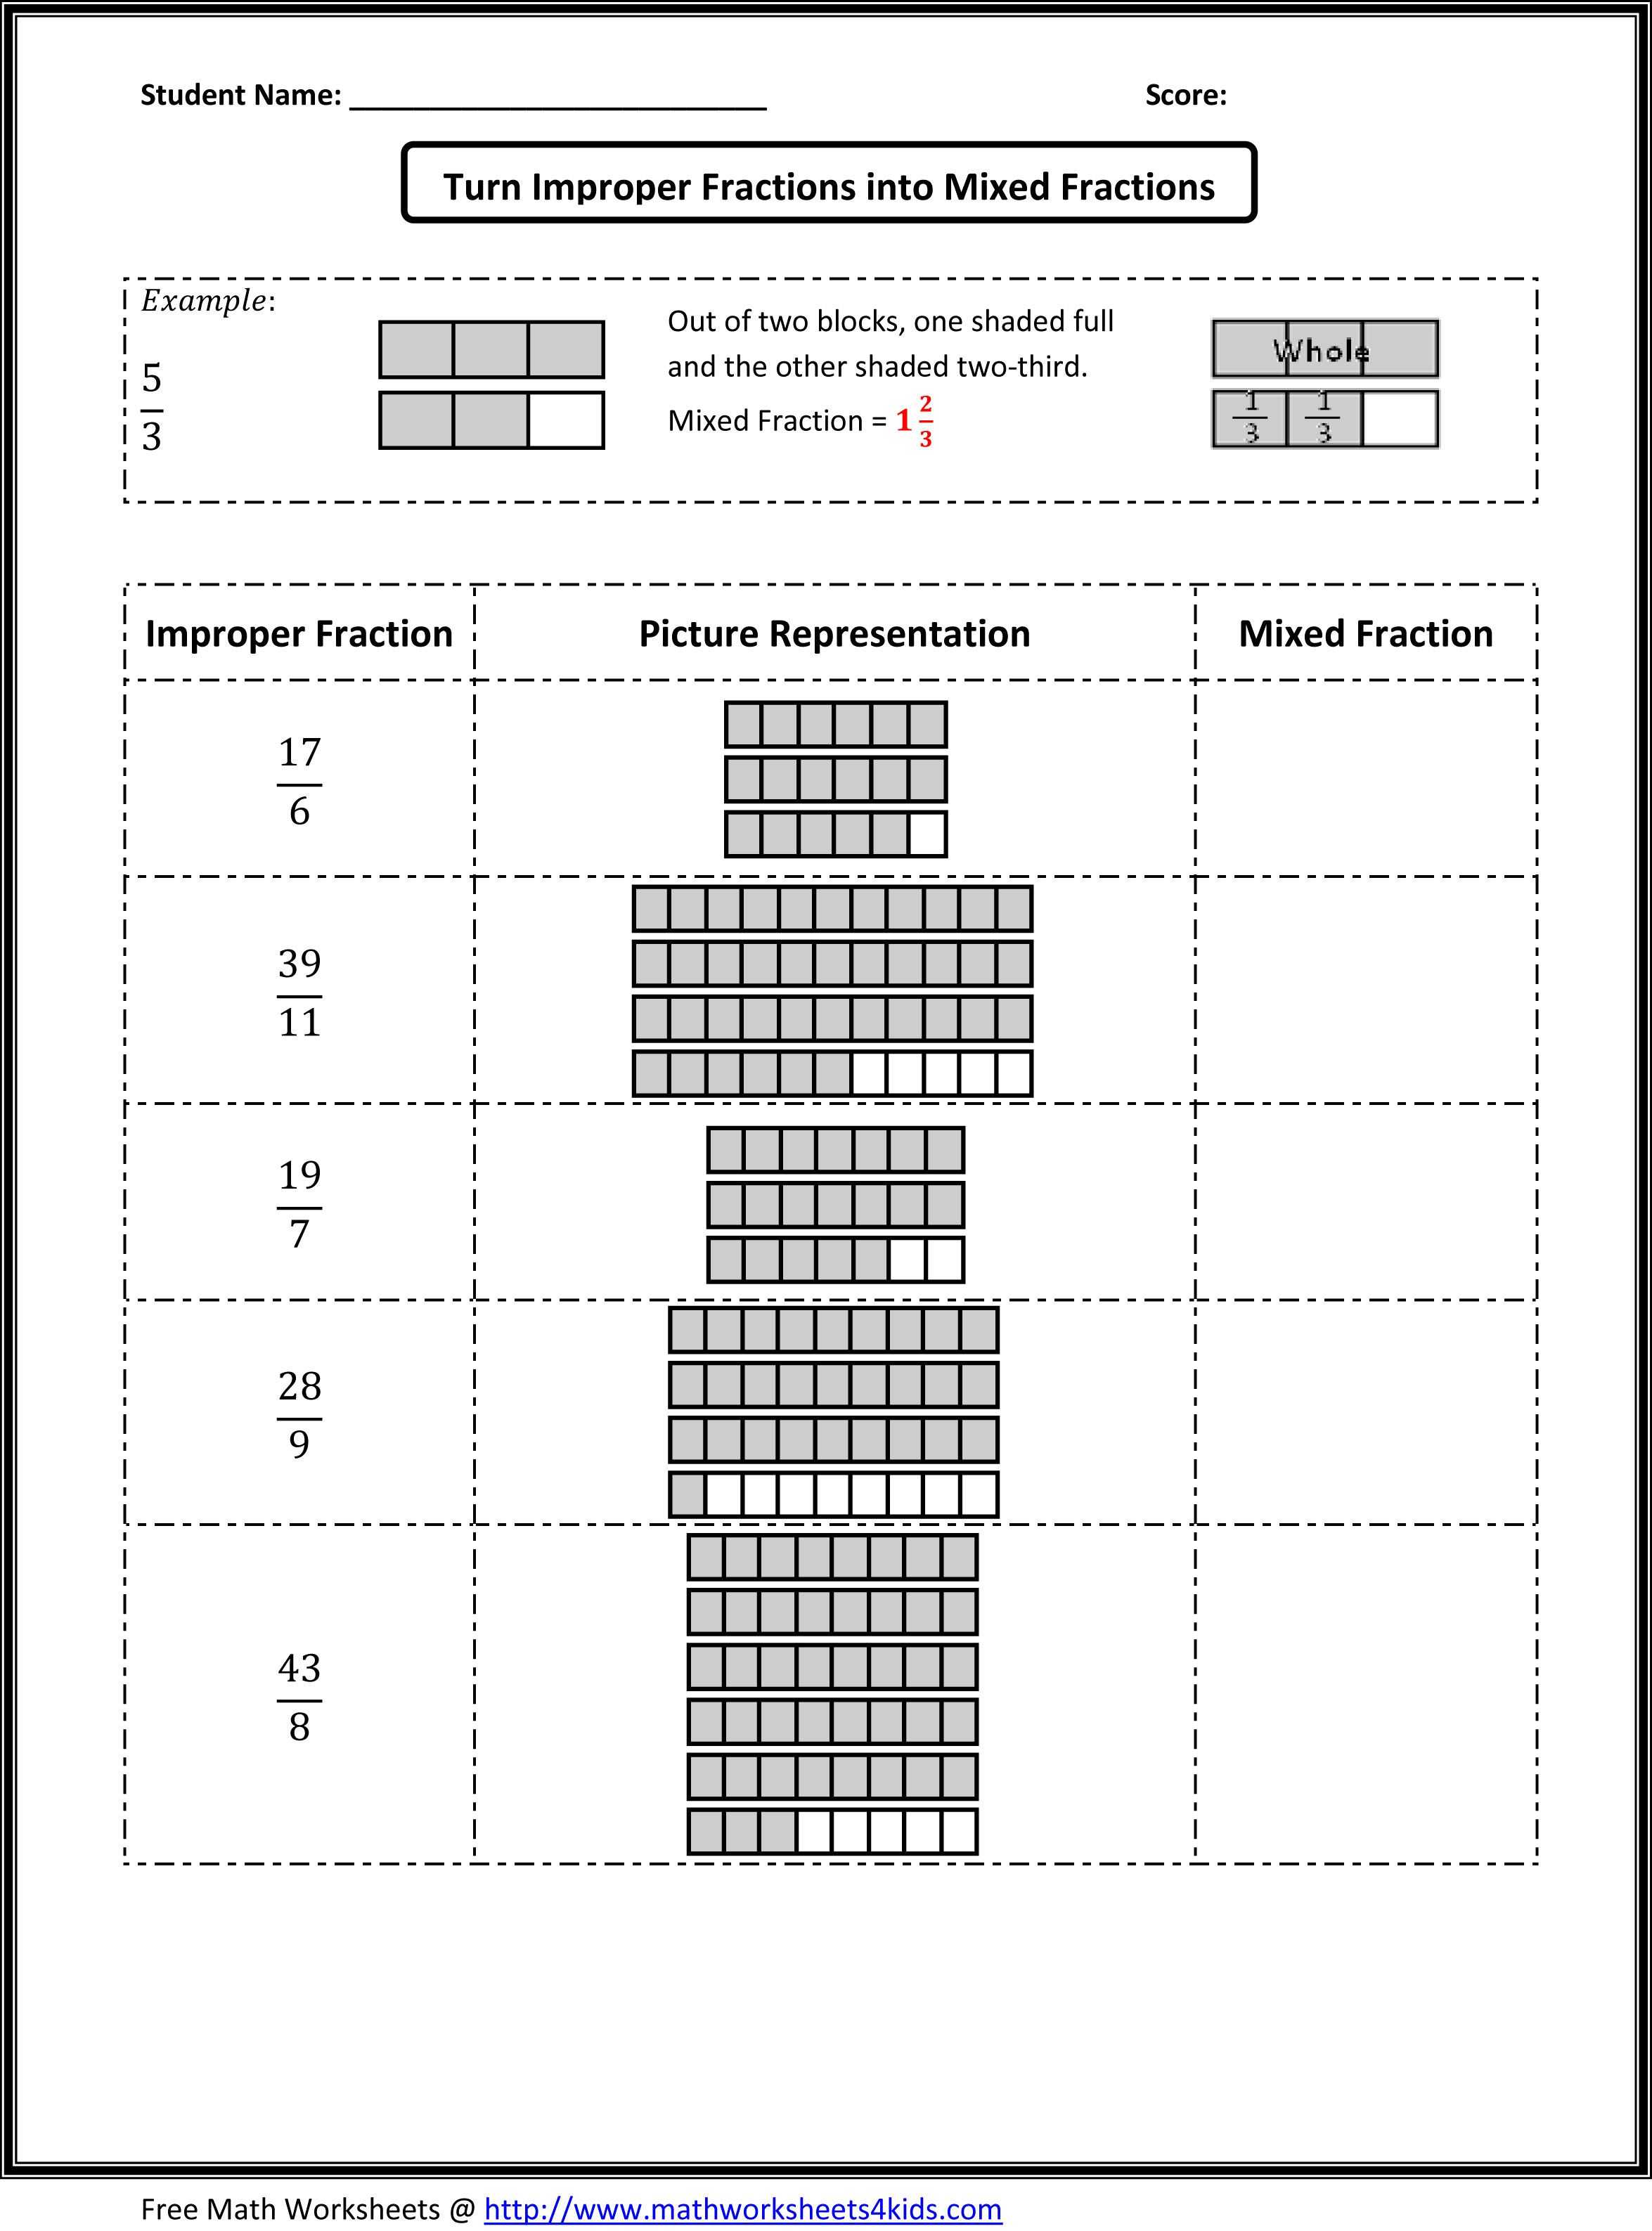 Reducing Fractions to Lowest Terms Worksheets or Worksheet Mixed Number and Improper Fraction Worksheets Ewinetaste